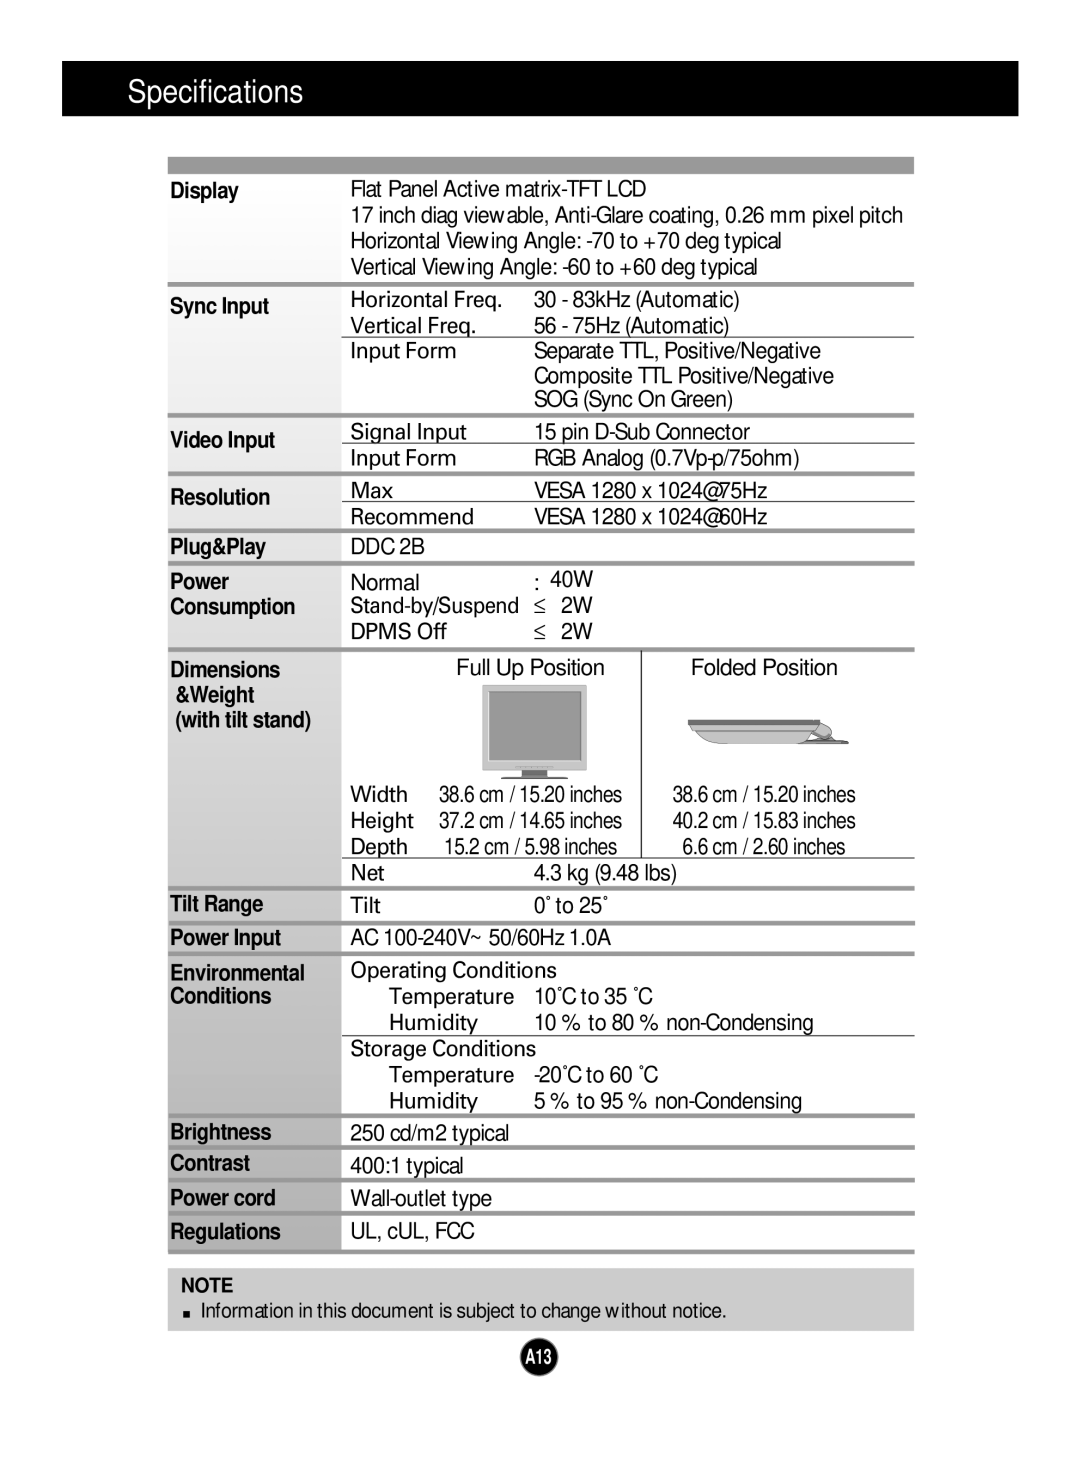 Planar PQ170 manual Specifications 